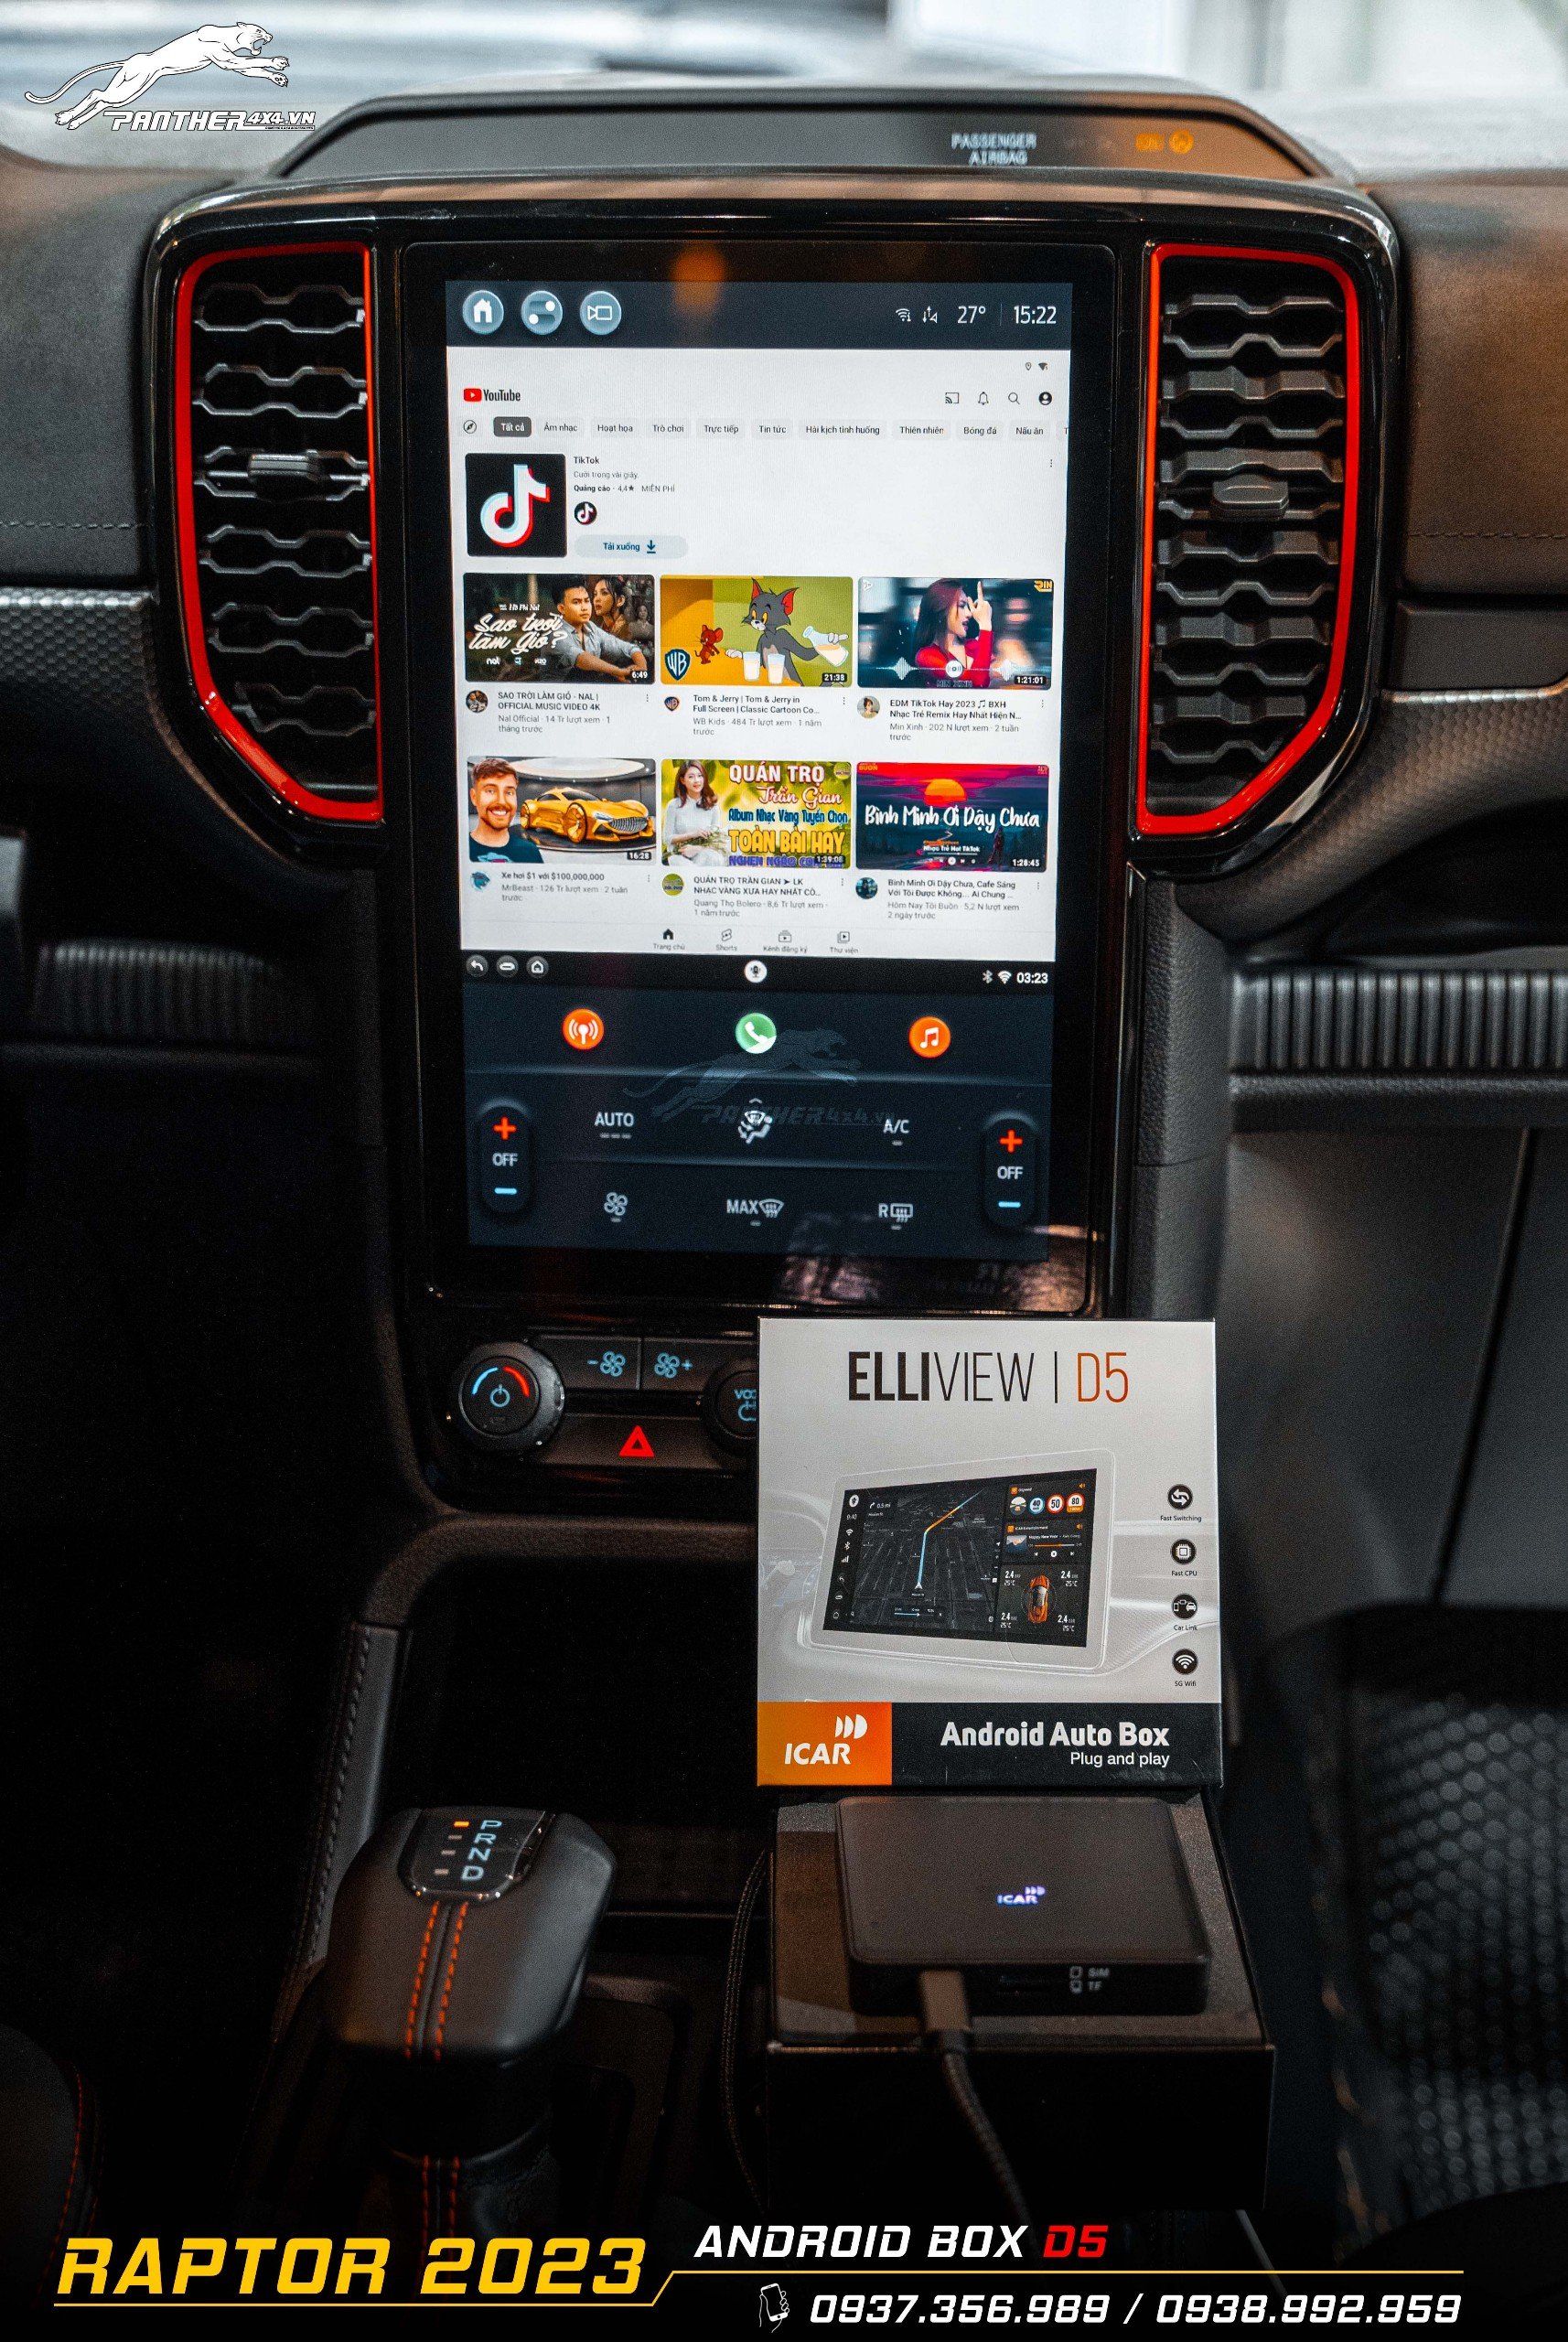 Android Auto Box Elliview D5